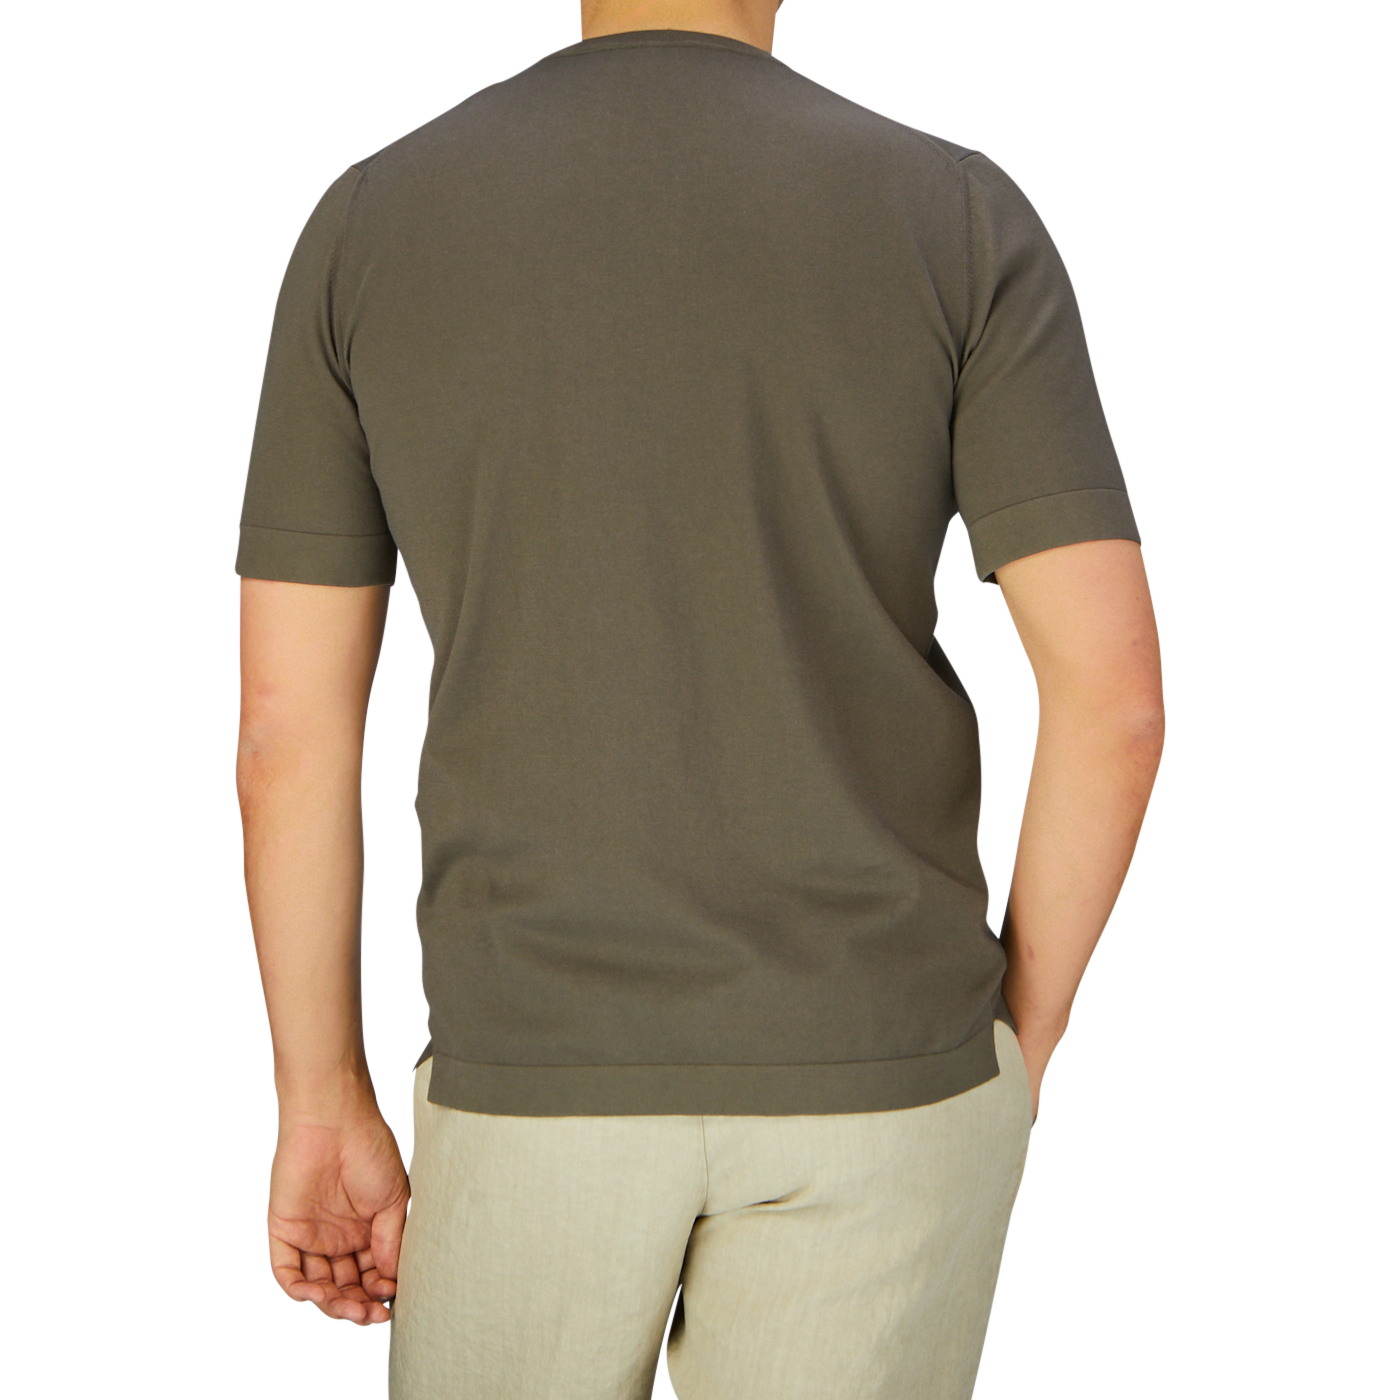 A person photographed from behind wearing a Gran Sasso olive green organic cotton t-shirt and cream-colored pants against a neutral background.